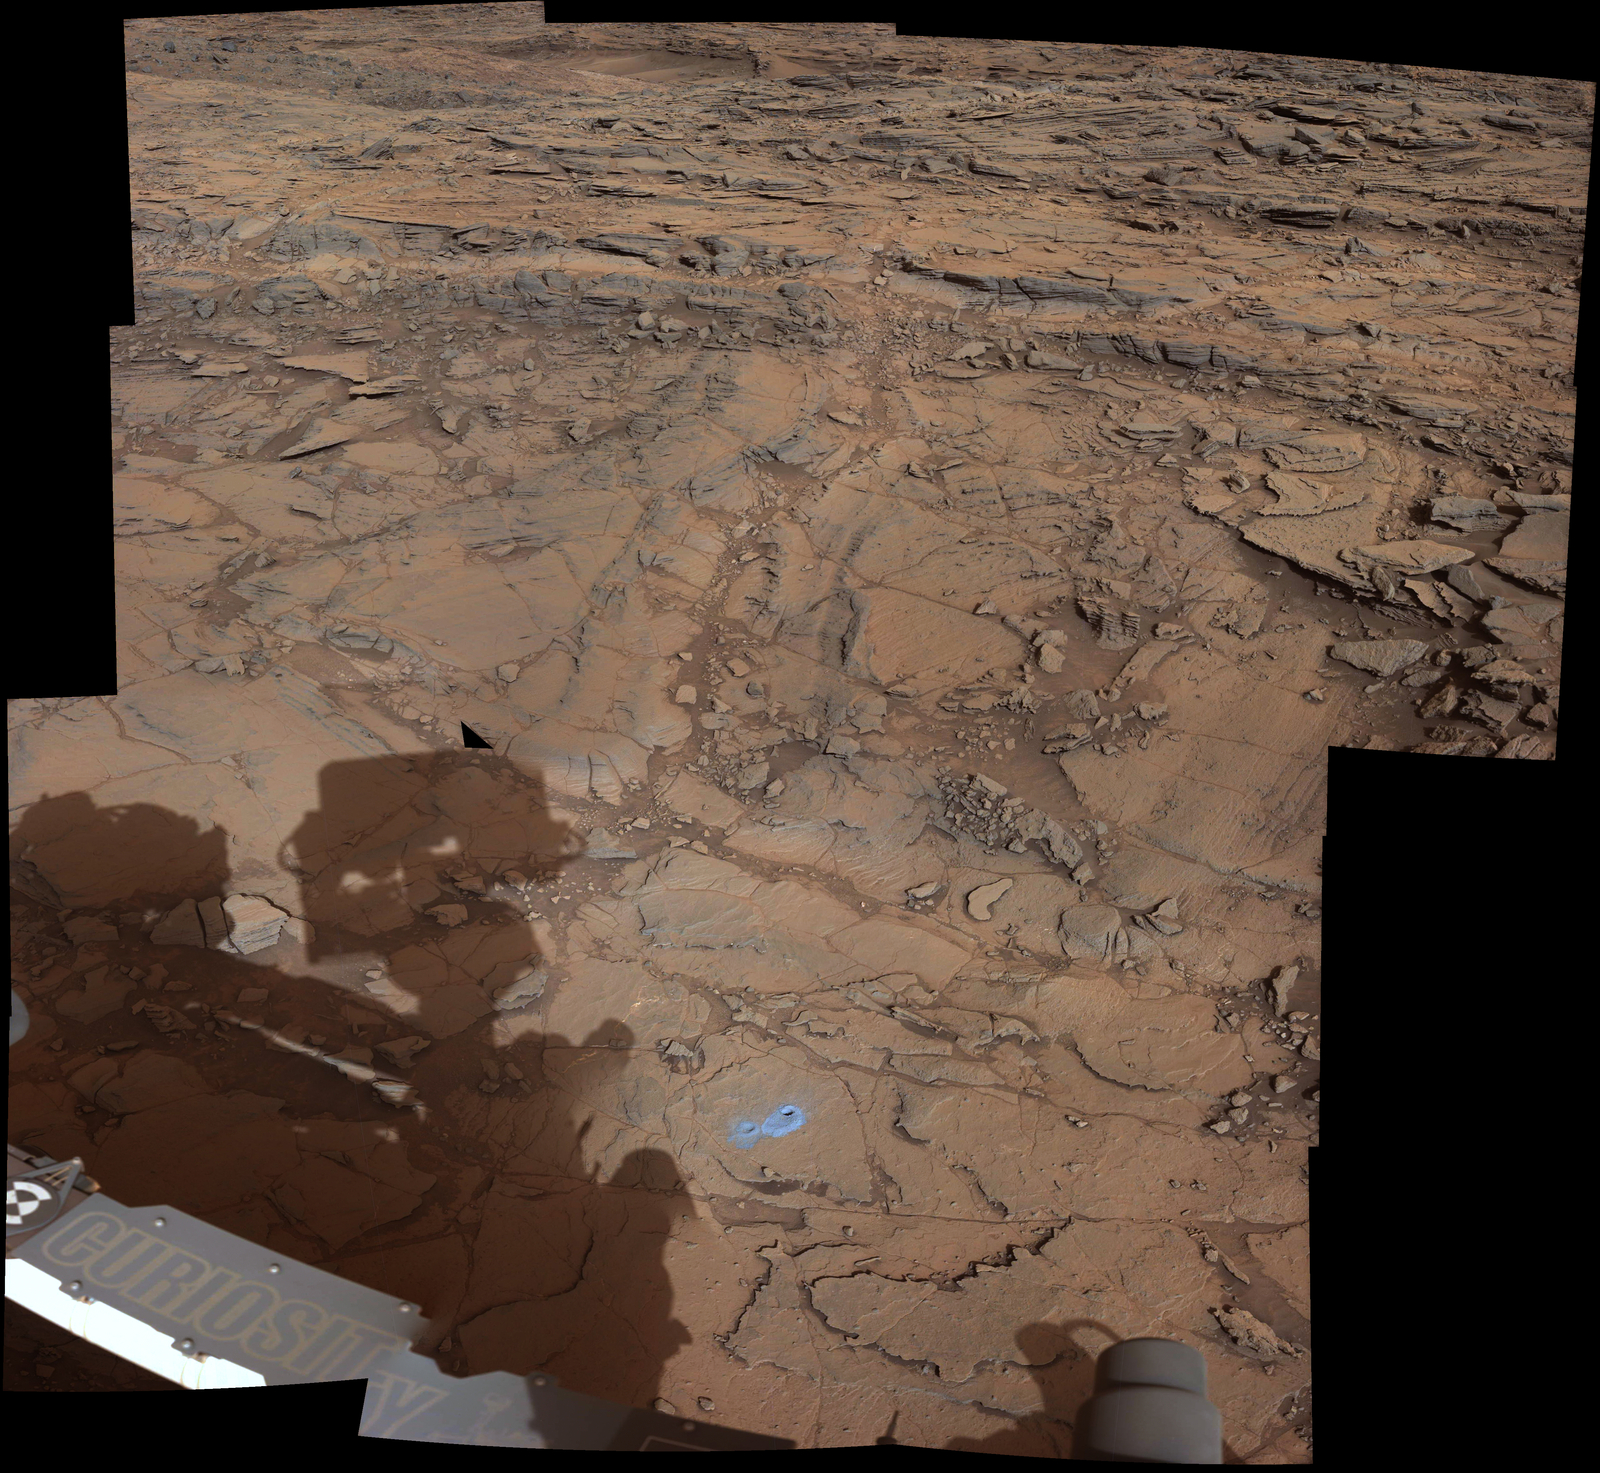 'Big Sky' and 'Greenhorn' Drilling Area on Mount Sharp